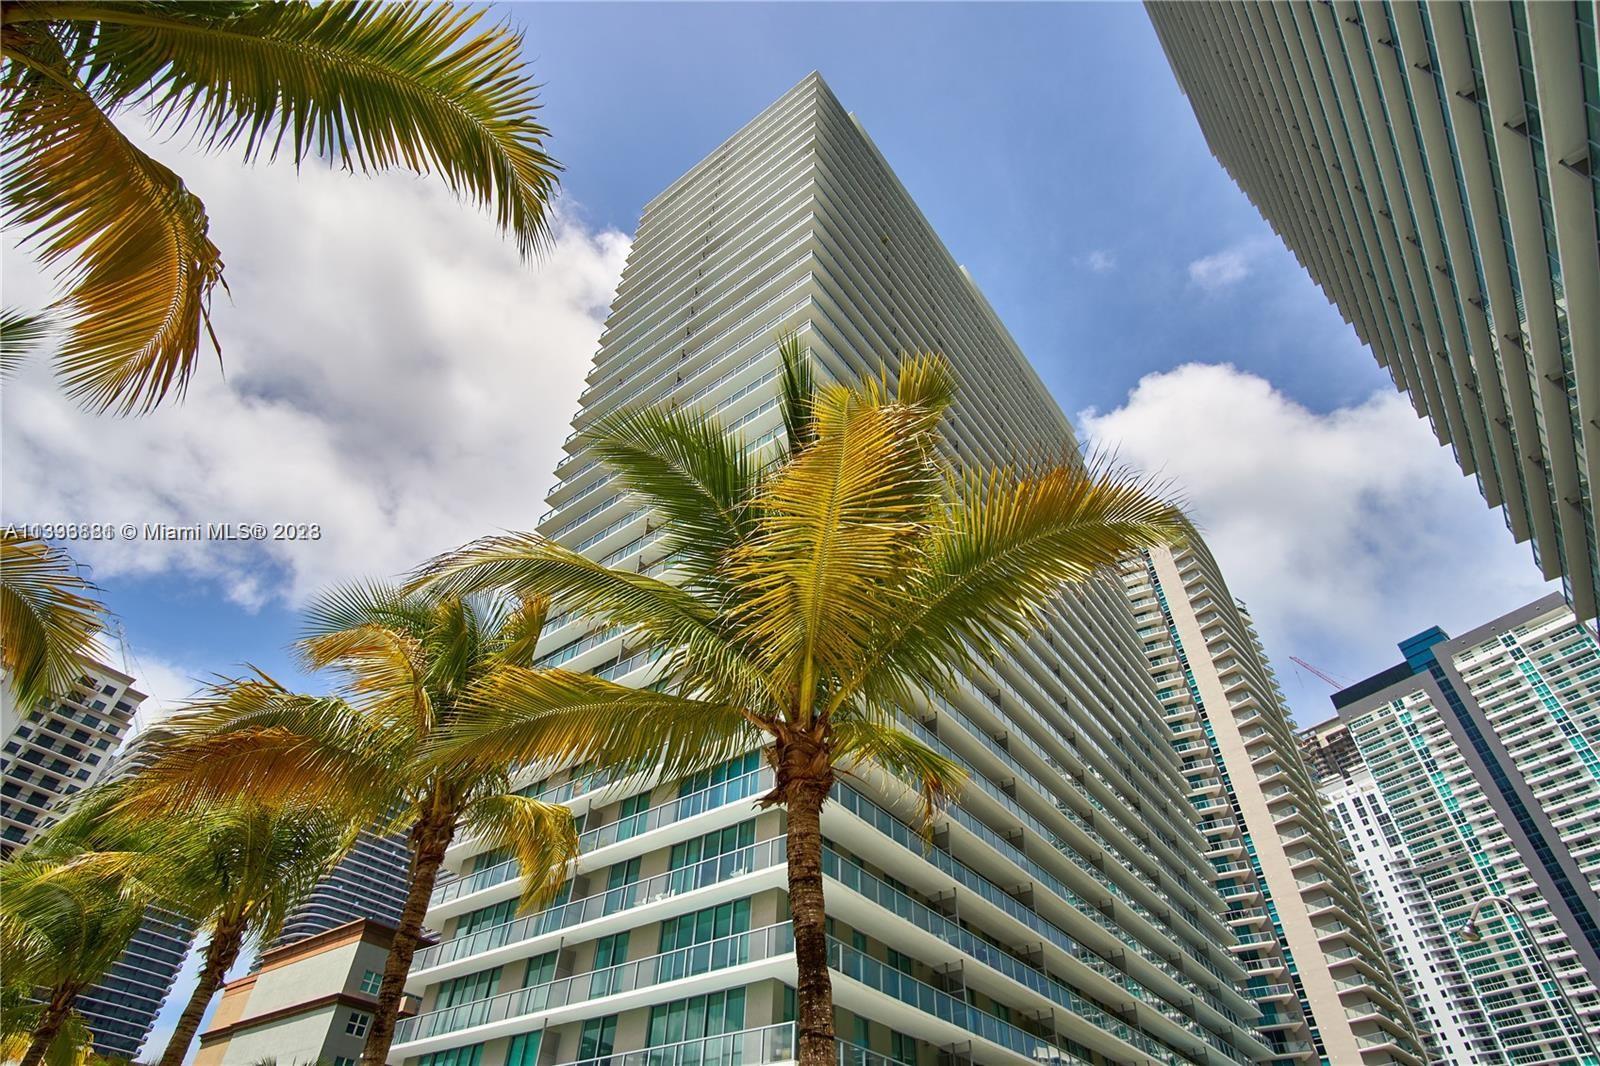 BRICKELL CONDO IN LUXURY BUILDING FEATURES ONE SPACIOUS BEDROOM AND ONE BATHROOM WITH TUB AND SEPARATE SHOWER. NEW WOOD FLOORING INSTALLED. EUROPEAN KITCHEN, GRANITE COUNTER TOP WITH STAINLESS STEEL APPLIANCES. WASHER & DRYER IN UNIT. CLOSE TO RESTAURANTS, PUBLIX, METRO AND MORE. IT IS VACANT.